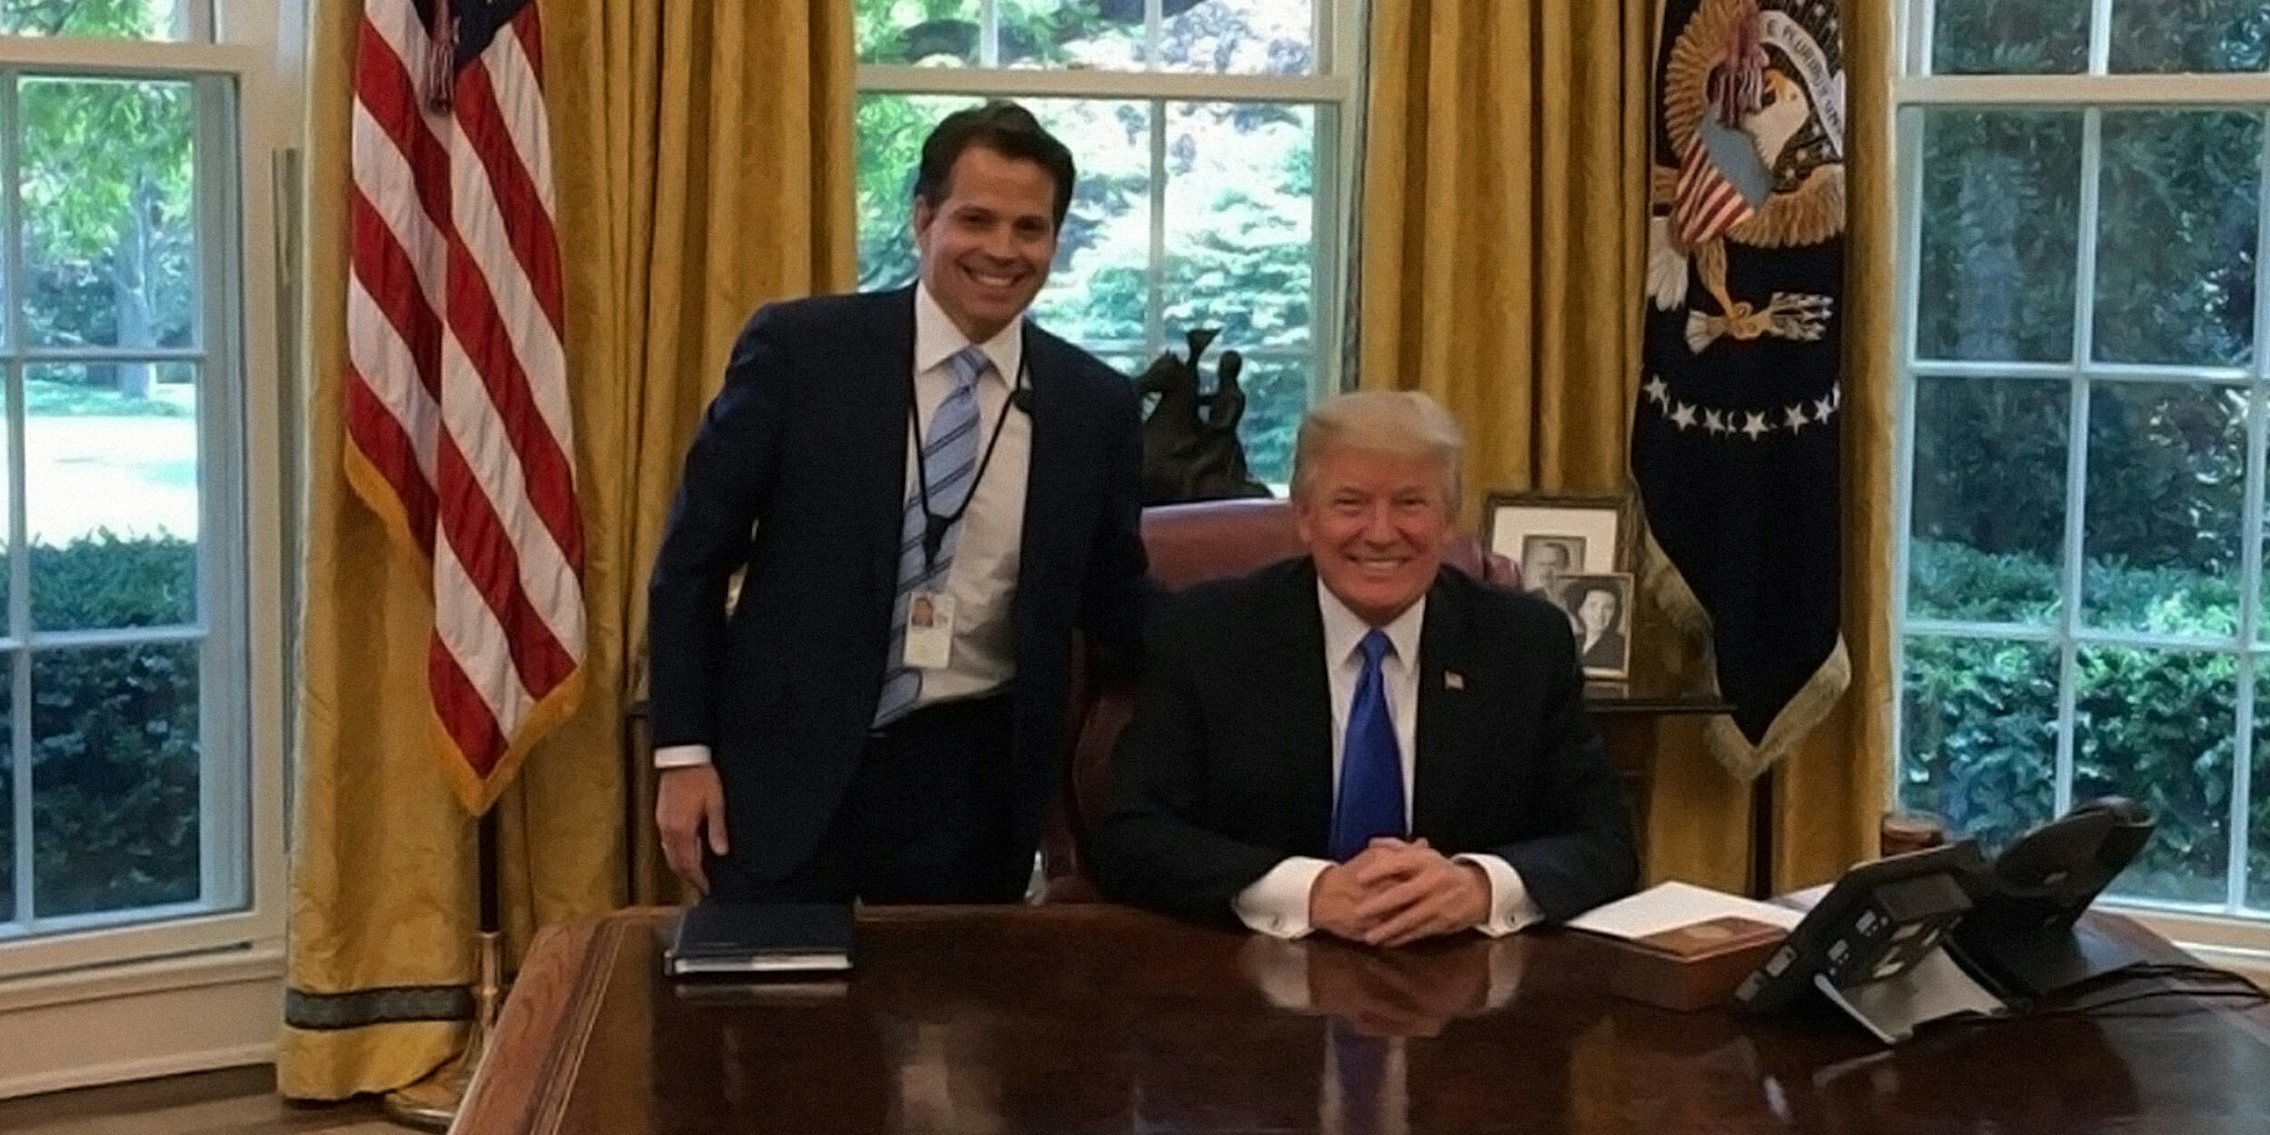 Anthony Scaramucci and Donald Trump in the Oval Office